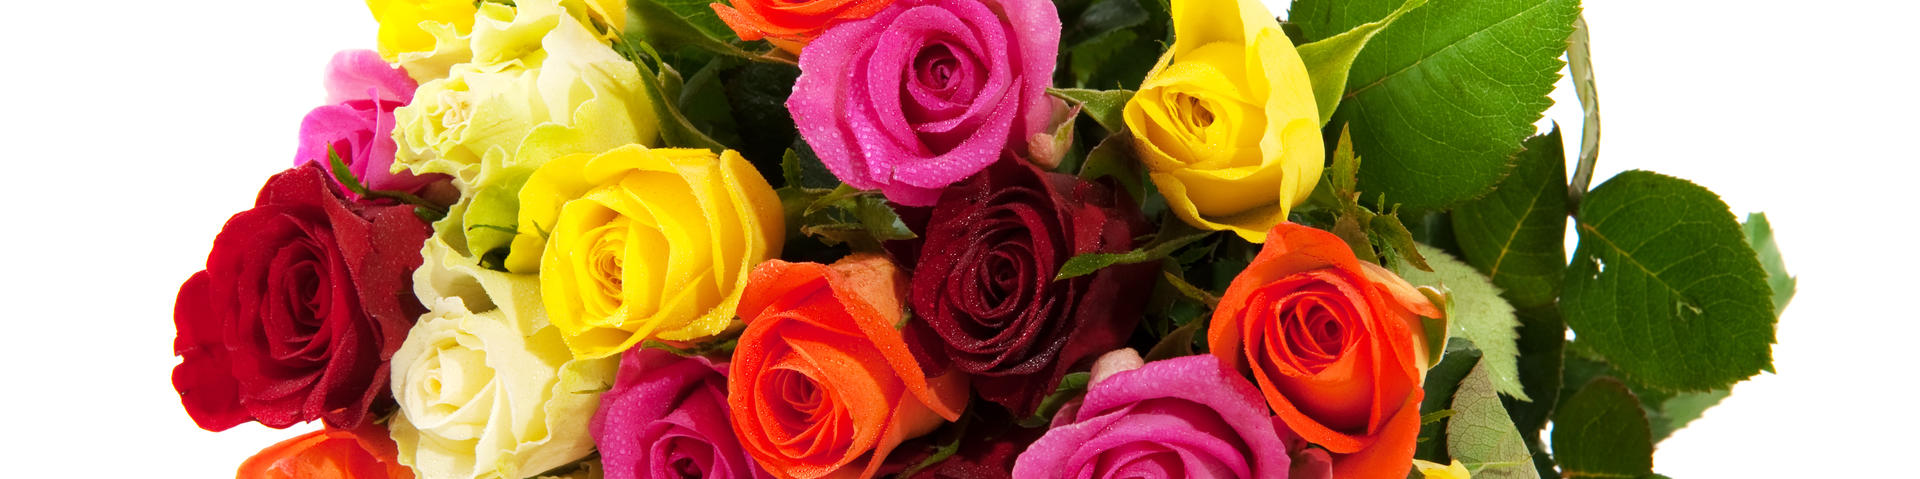     <div class="container flex-box justify-content-center">        <div class="text-wrapper">            <h1>Beautiful Roses</h1>            <h2>Grown especially for you in Mosgiel</h2>        </div><a href="/category/5/Bouquets" class="primary-btn">See More</a>    </div>